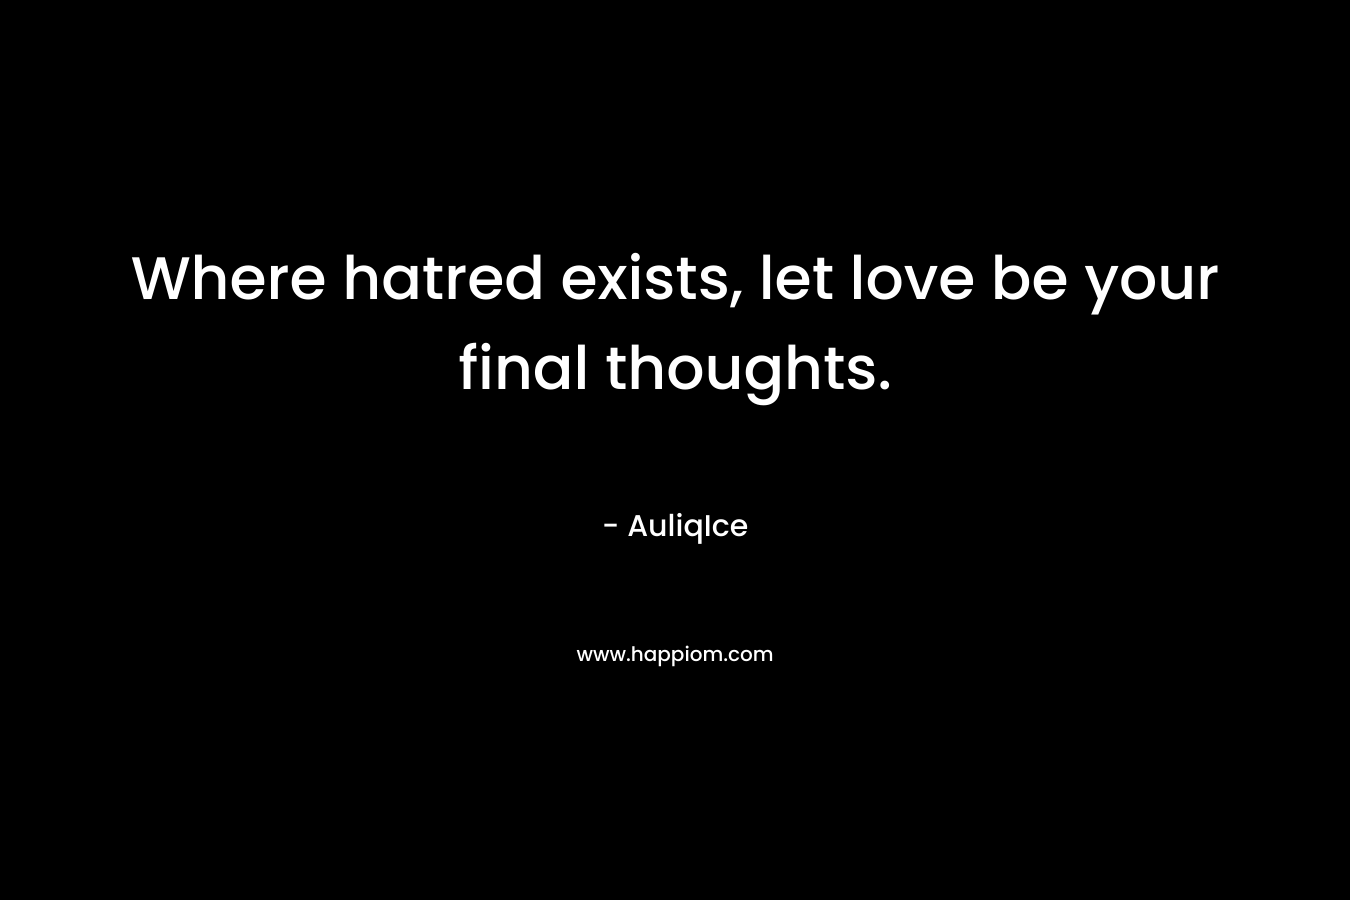 Where hatred exists, let love be your final thoughts. – AuliqIce